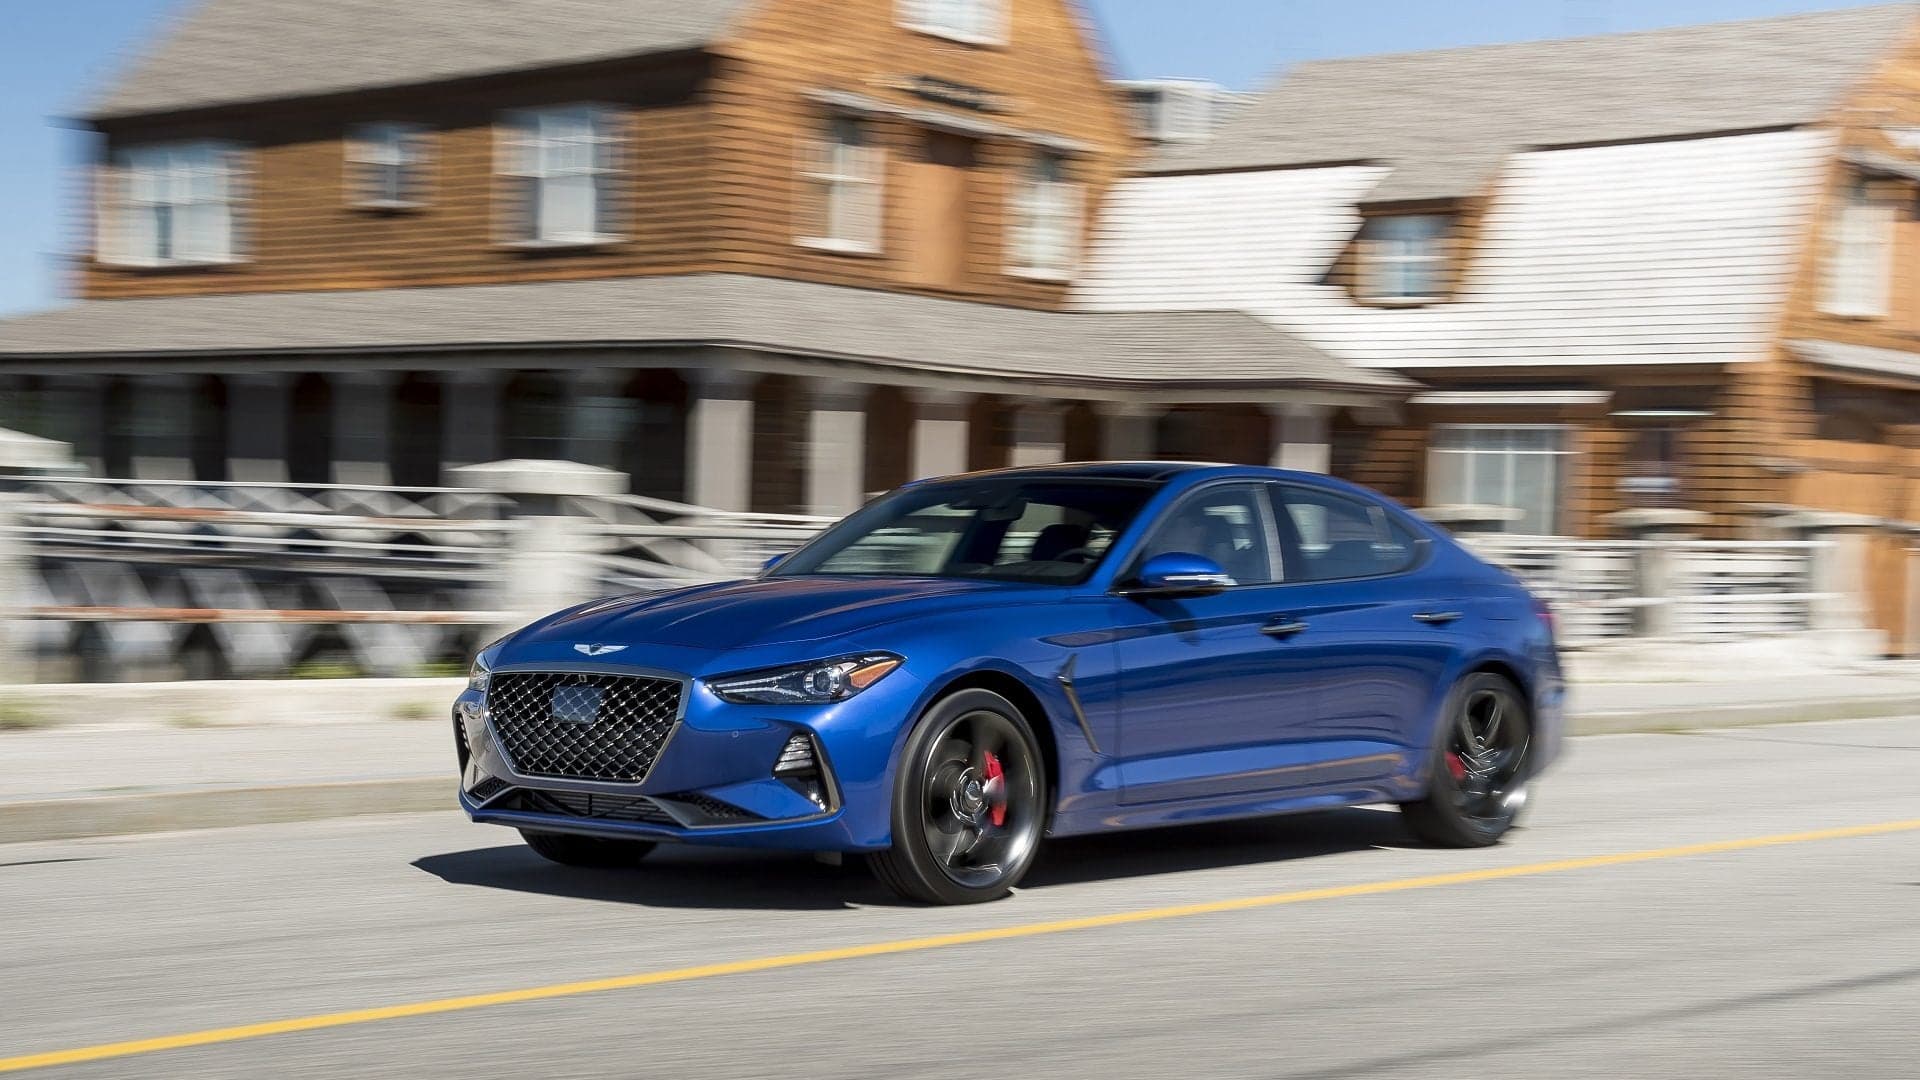 Hyundai and Genesis Will Cover 6 Months of Car Payments If You Lose Your Job to Coronavirus